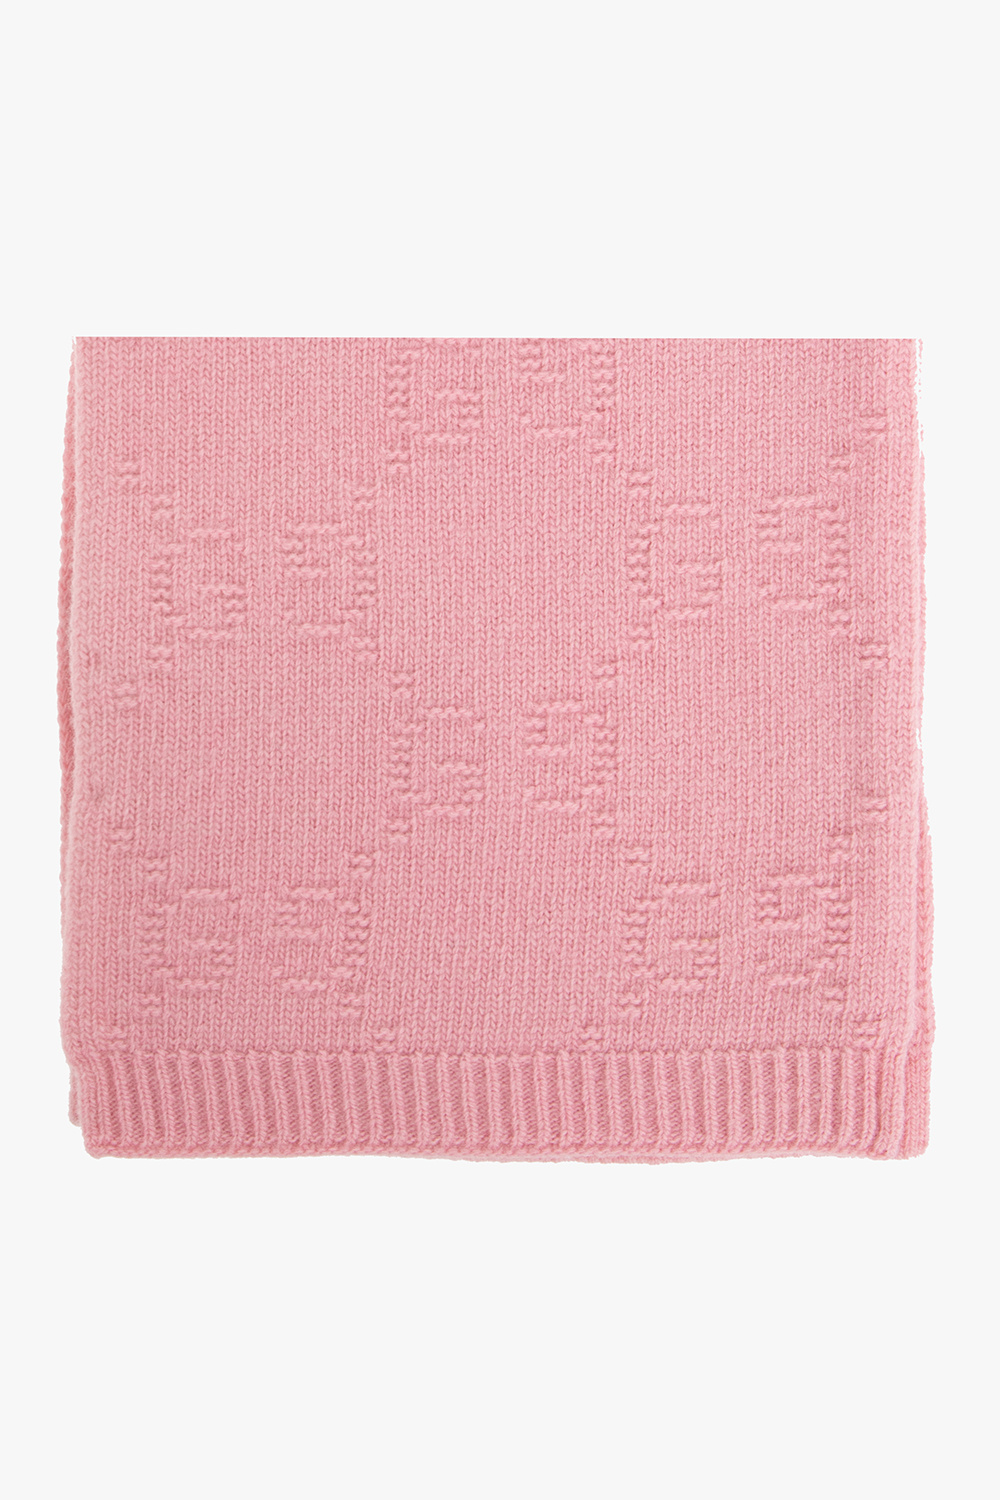 gucci the Kids Monogrammed scarf